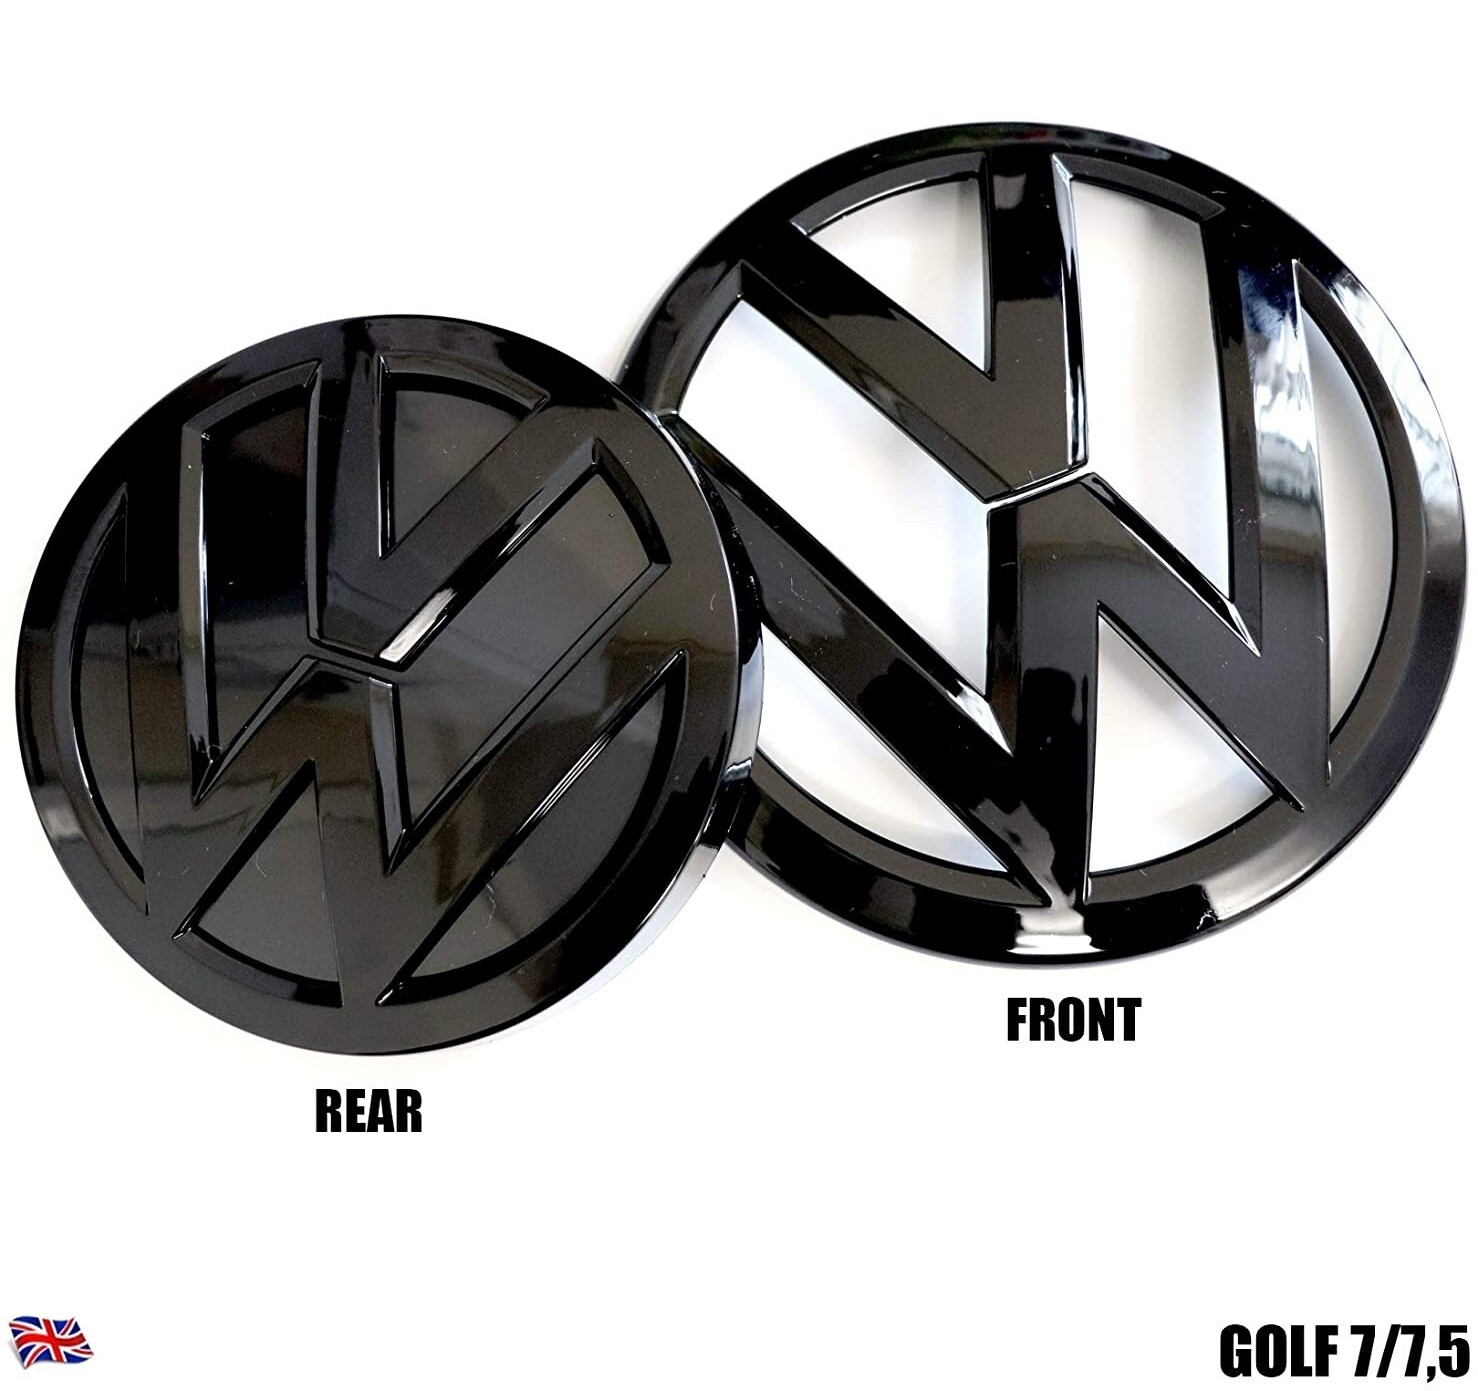 Volkswagen golf mk7 mk7.5 black front and rear replacement badge set